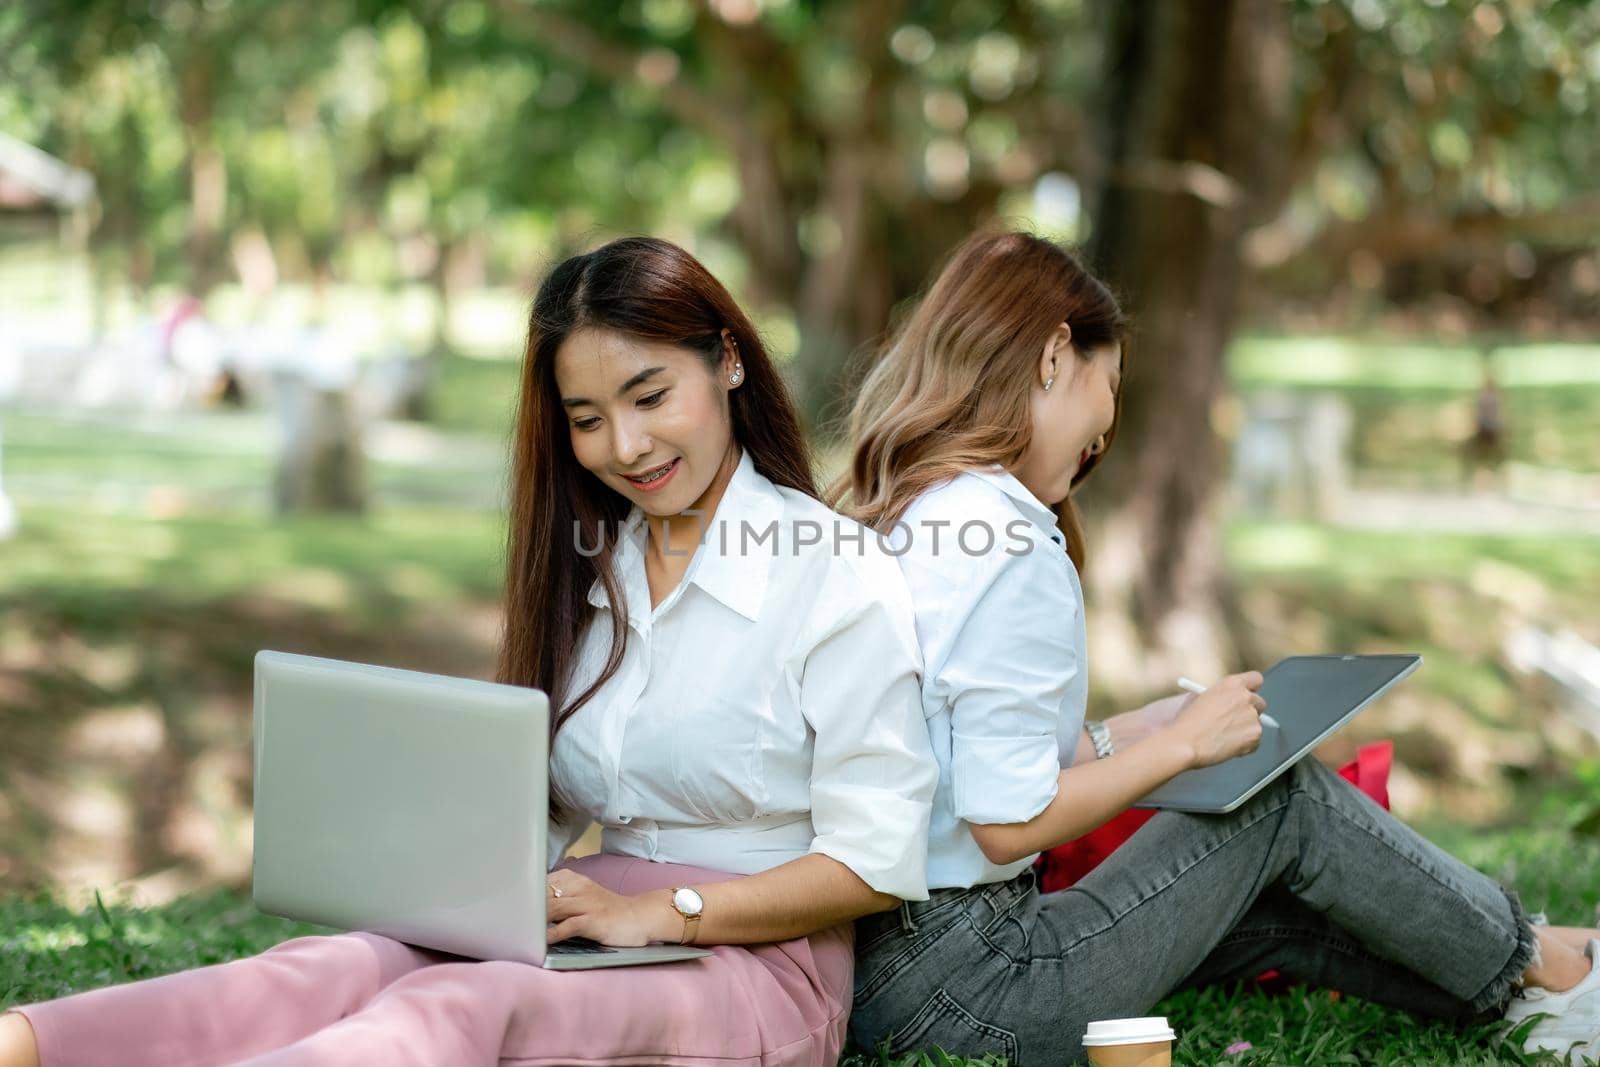 Woman students studying in a group project in the park of university or school. Happy learning, community teamwork and youth friendship concept.